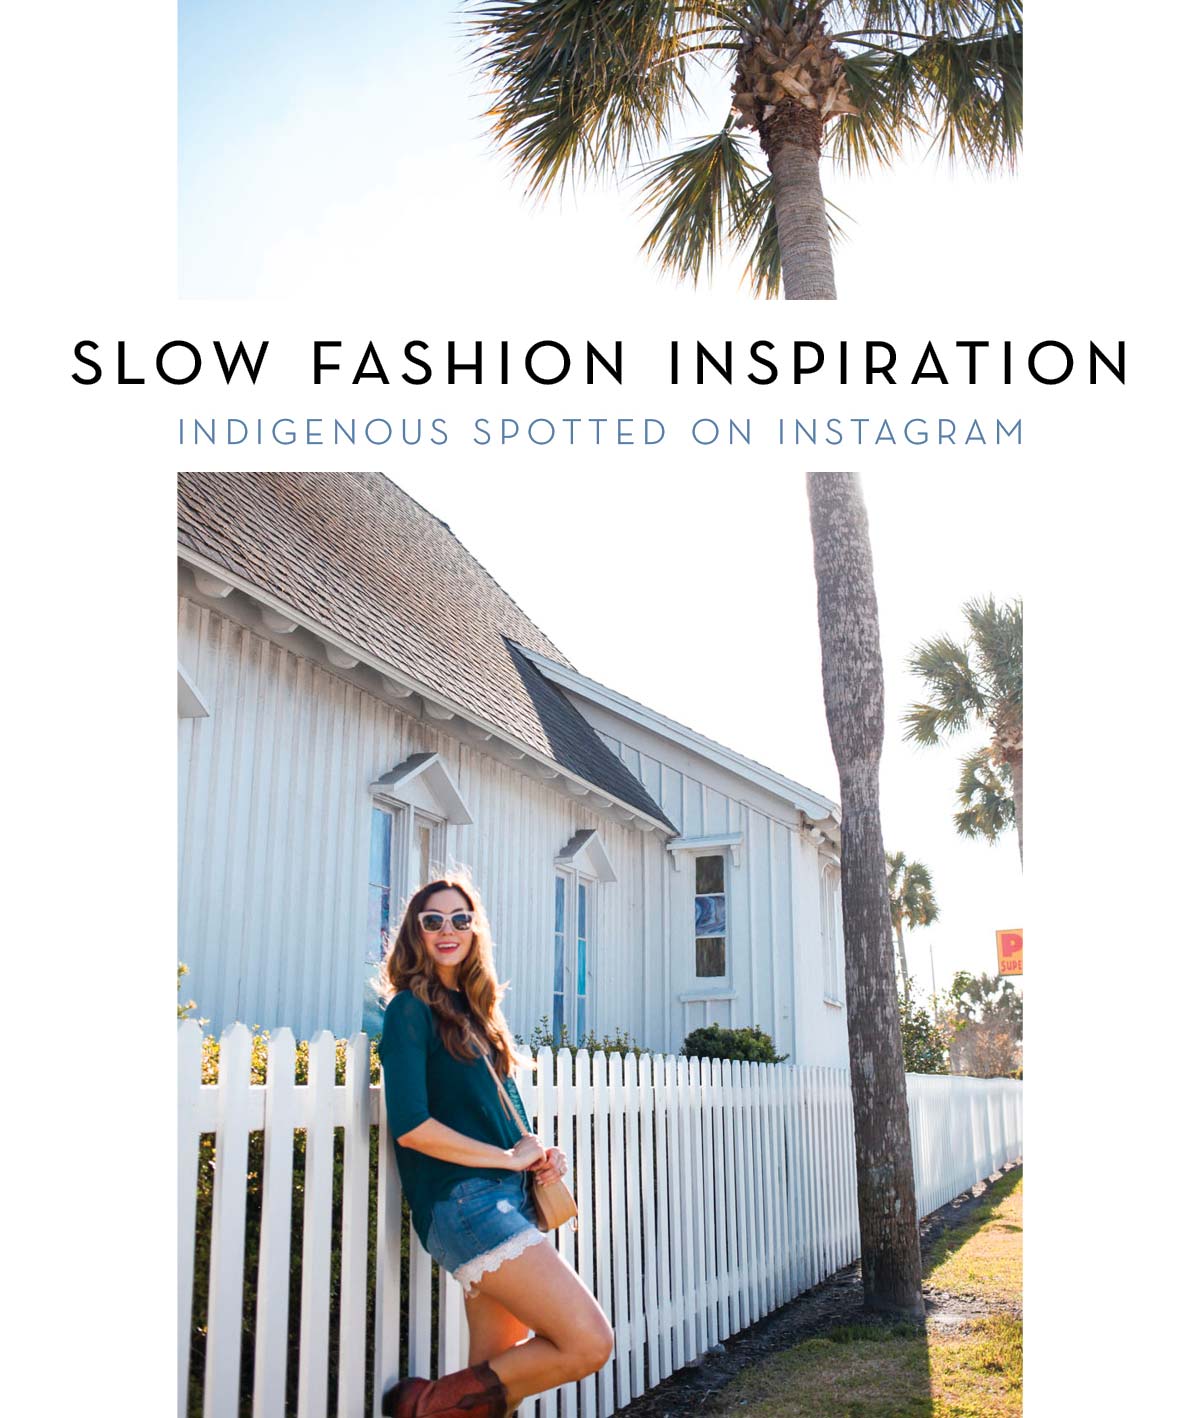 Slow Fashion Inspiration | sustainable clothing brand Indigenous spotted on Instagram